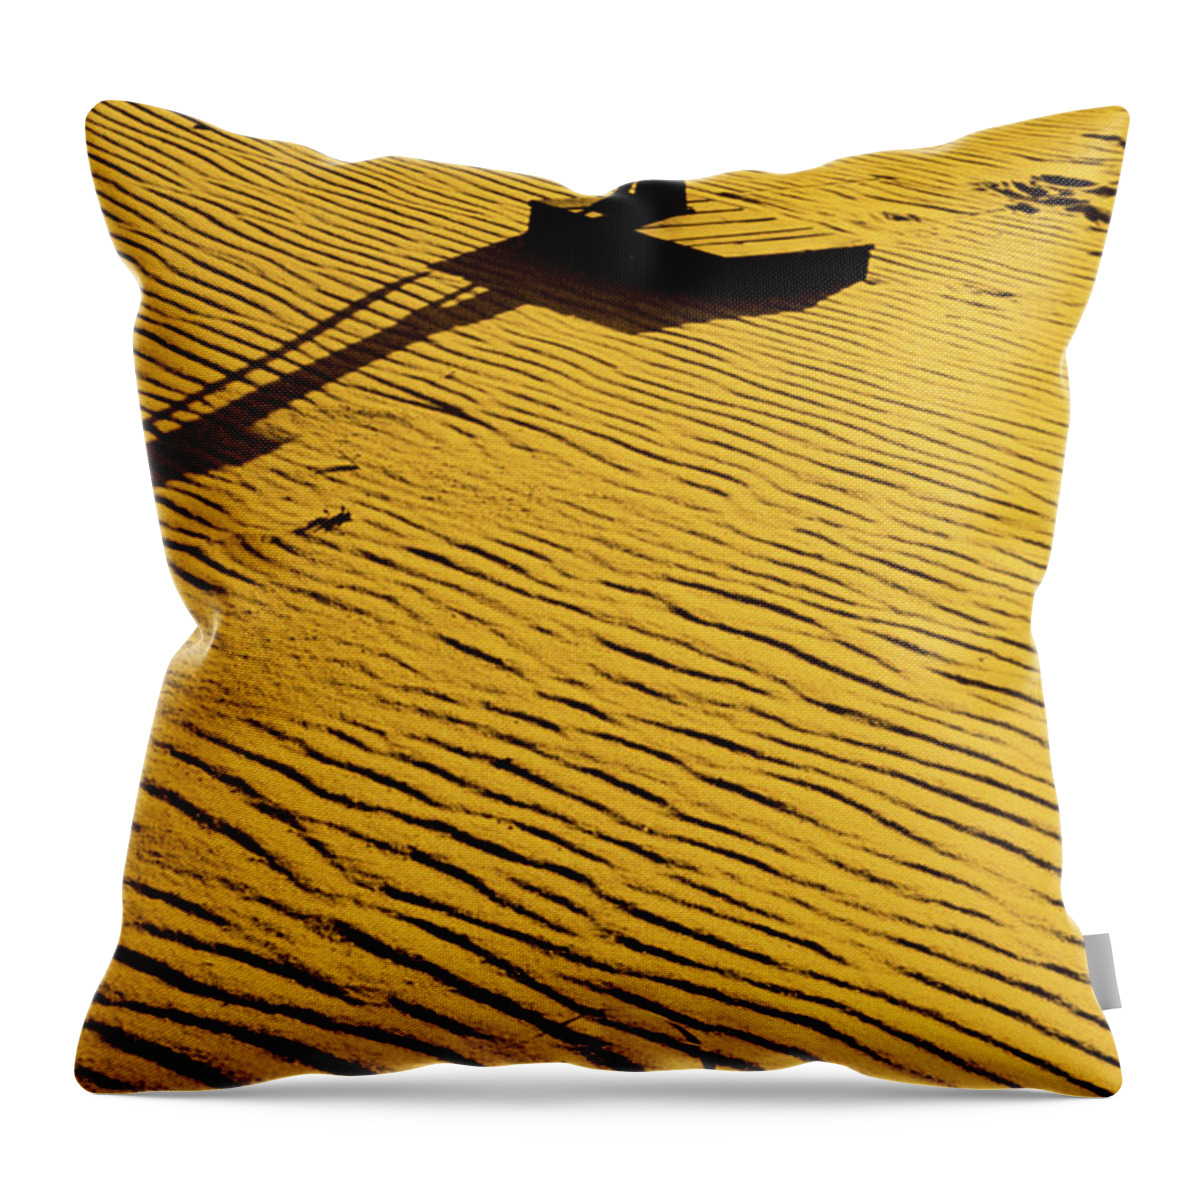 Shadow Throw Pillow featuring the photograph Water Pump In Sand by Alfred Gescheidt